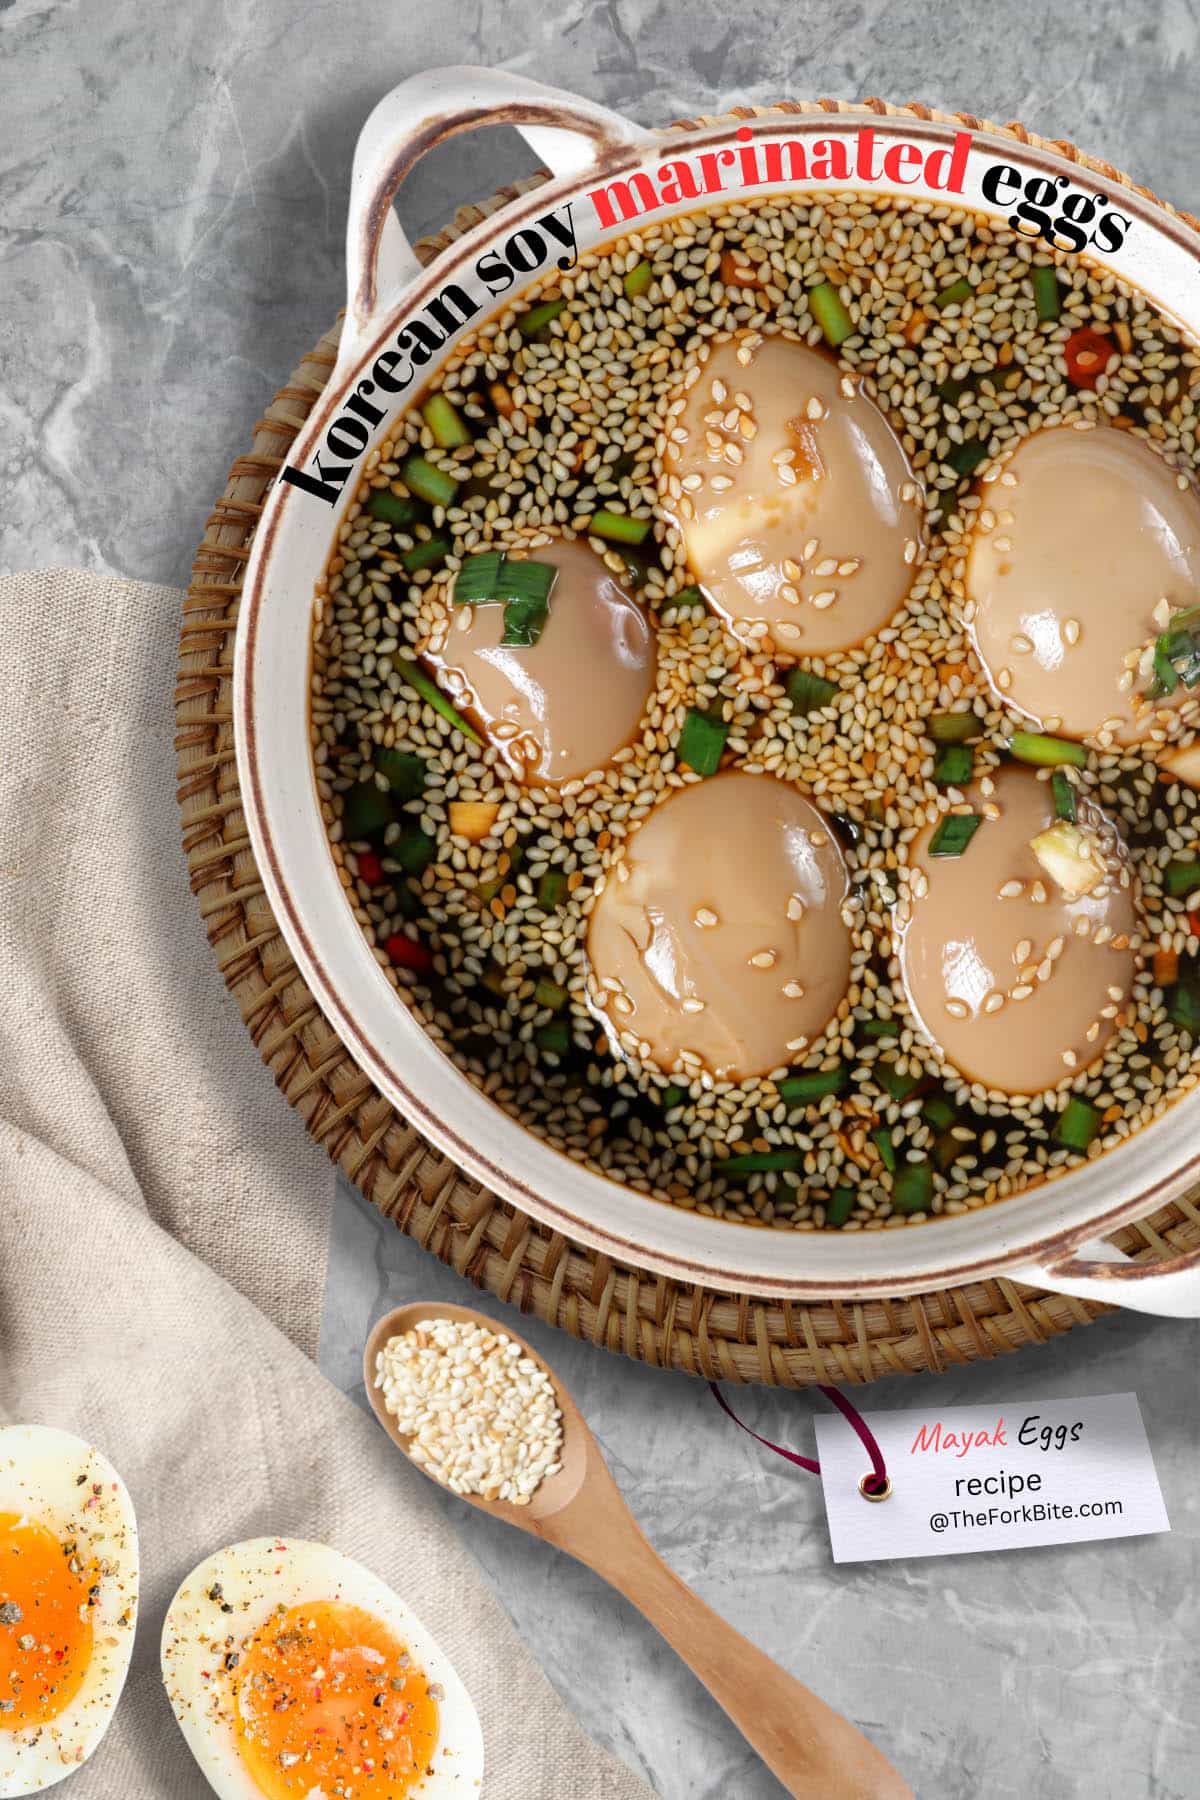 Mayak Eggs, a Korean side dish with savory, sweet, umami flavor. Marinated eggs with jammy yolks.